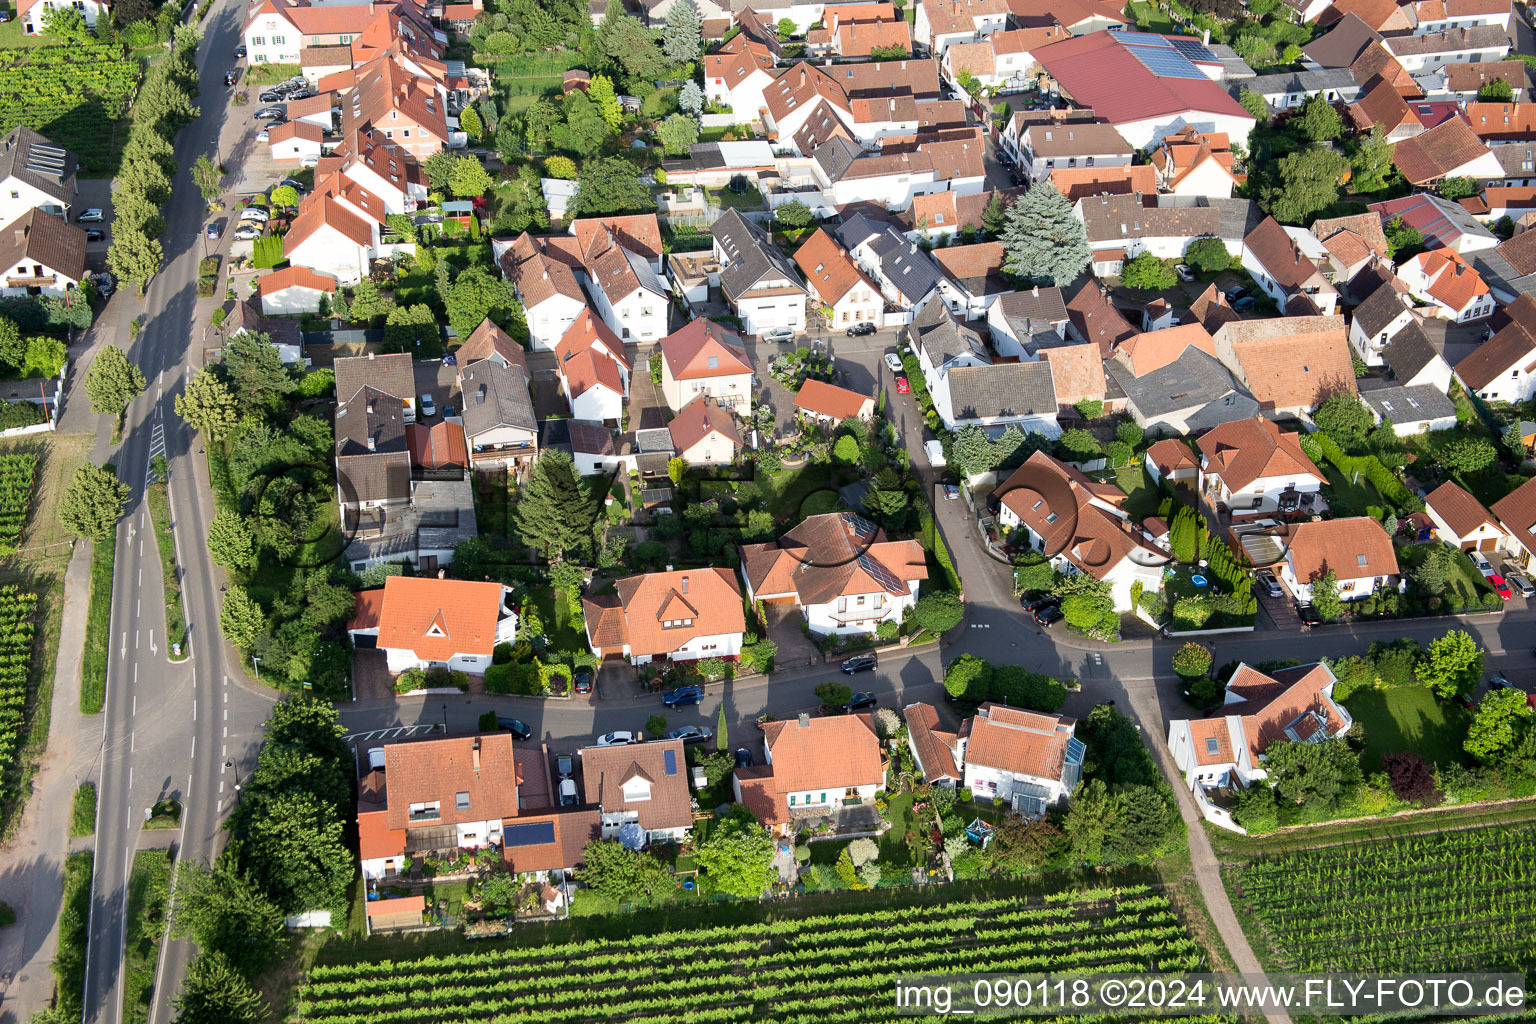 Aerial view of Venningen in the state Rhineland-Palatinate, Germany